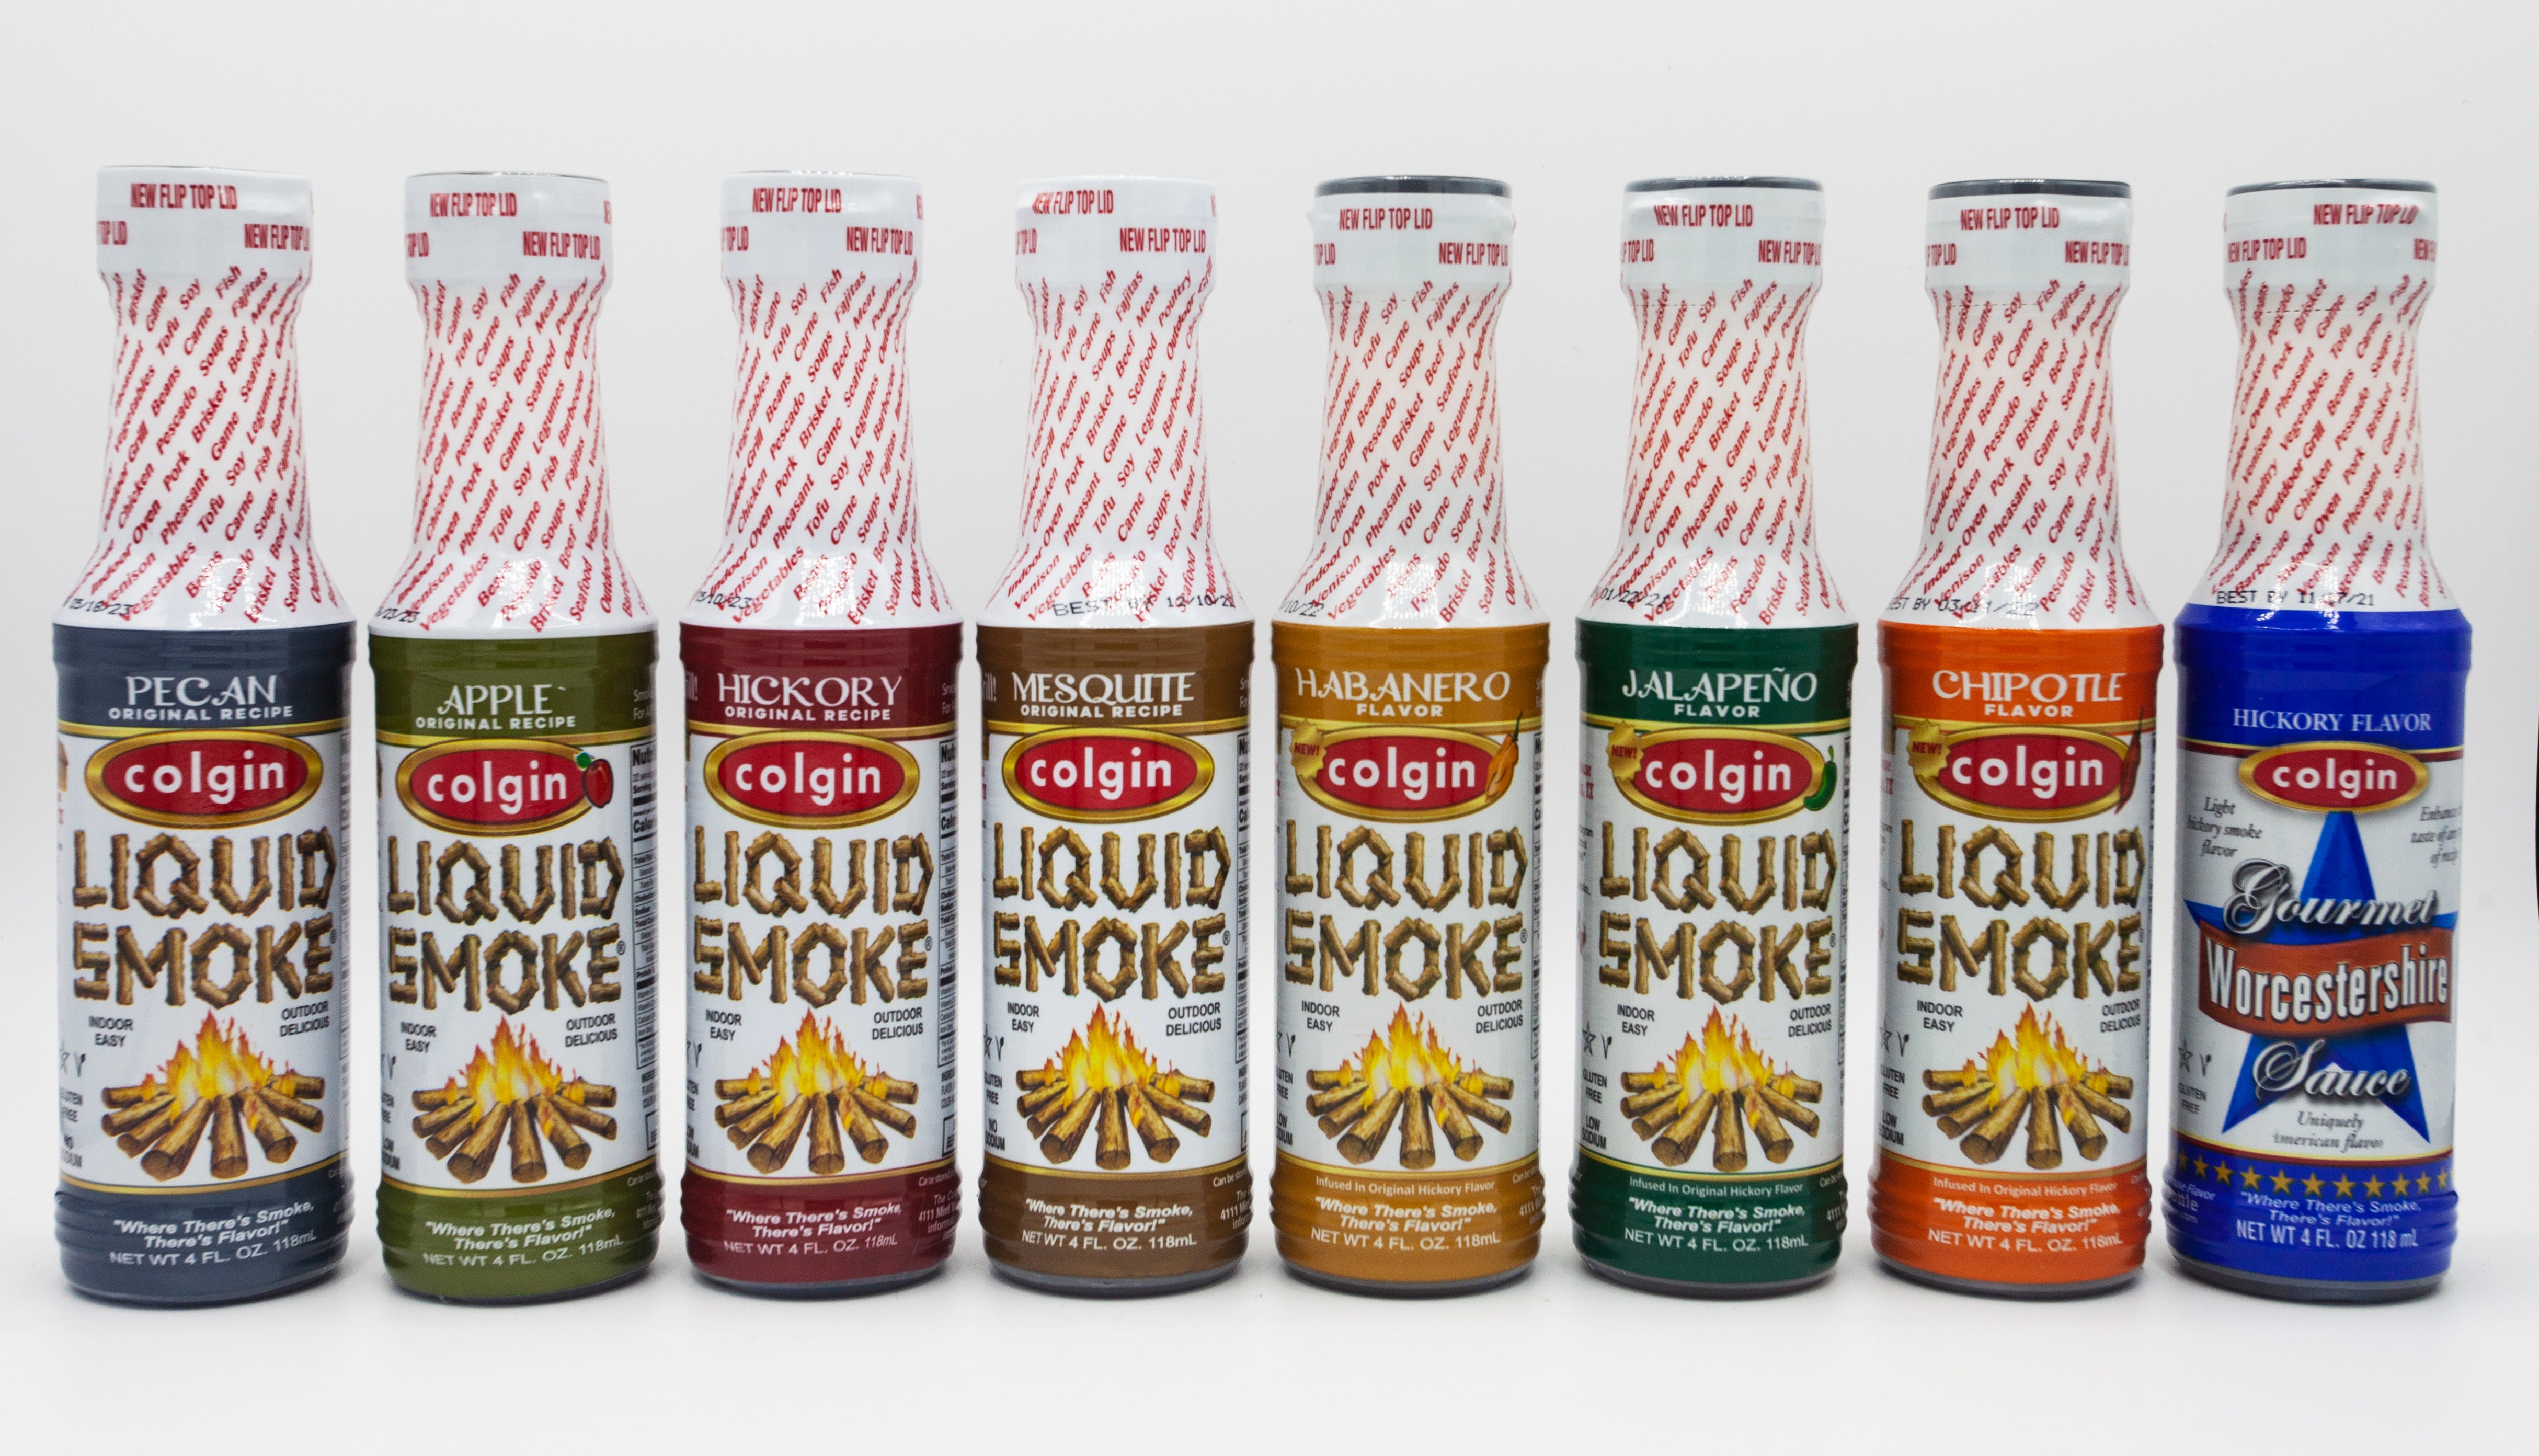 7 Smokin' Flavors for Any Smoky Barbecue or Meal